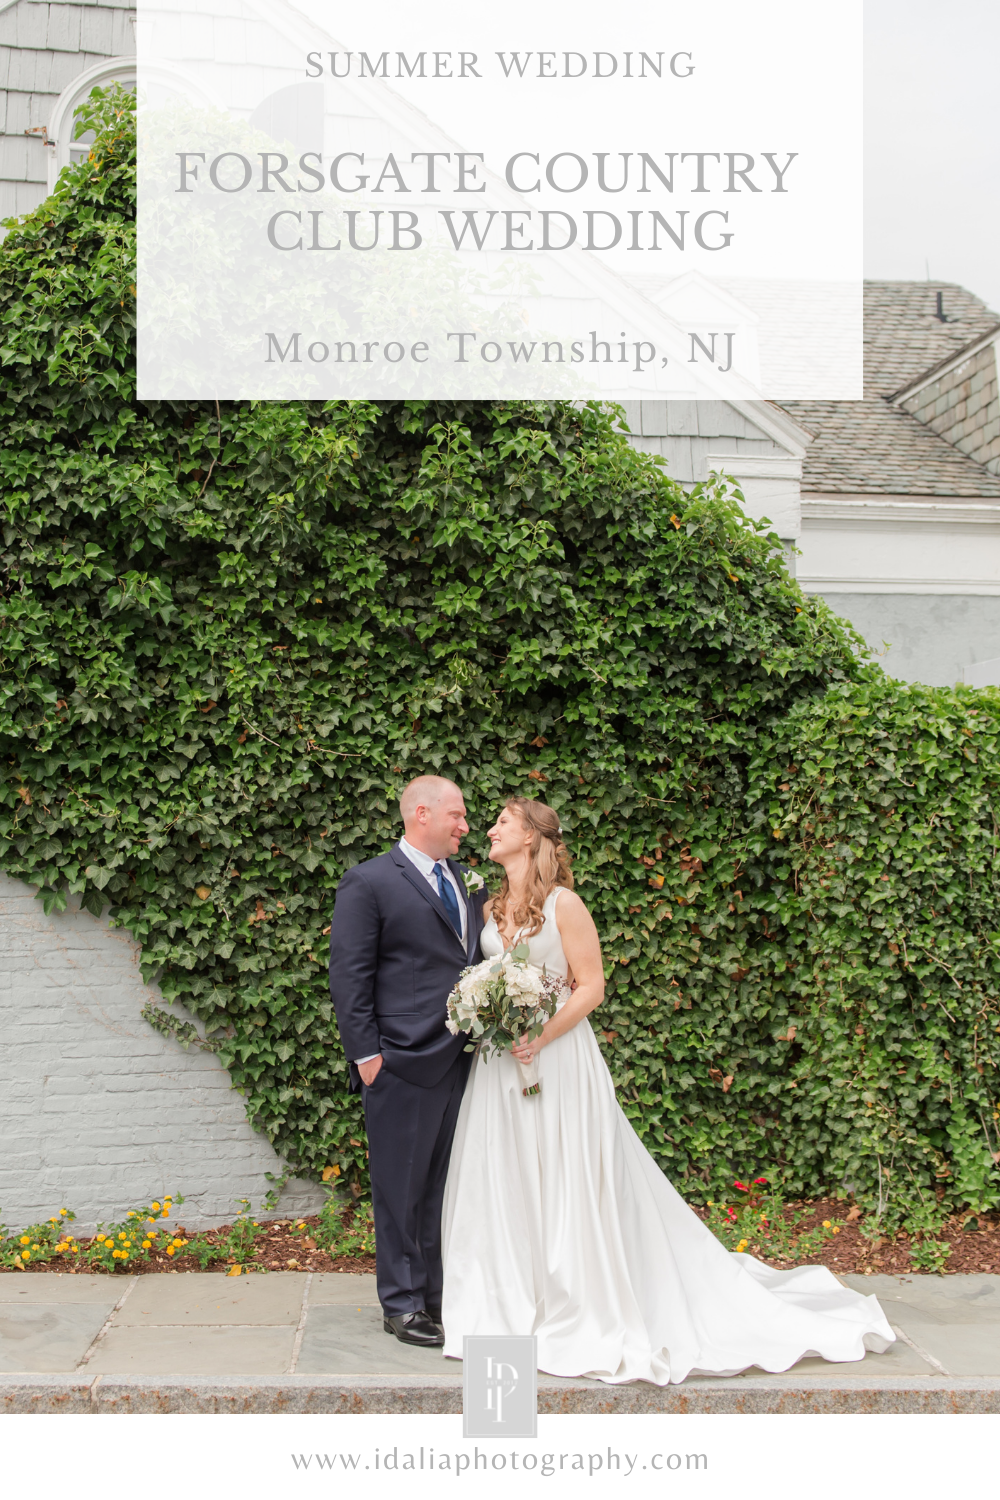 Forsgate Country Club wedding day photographed by Idalia Photography 